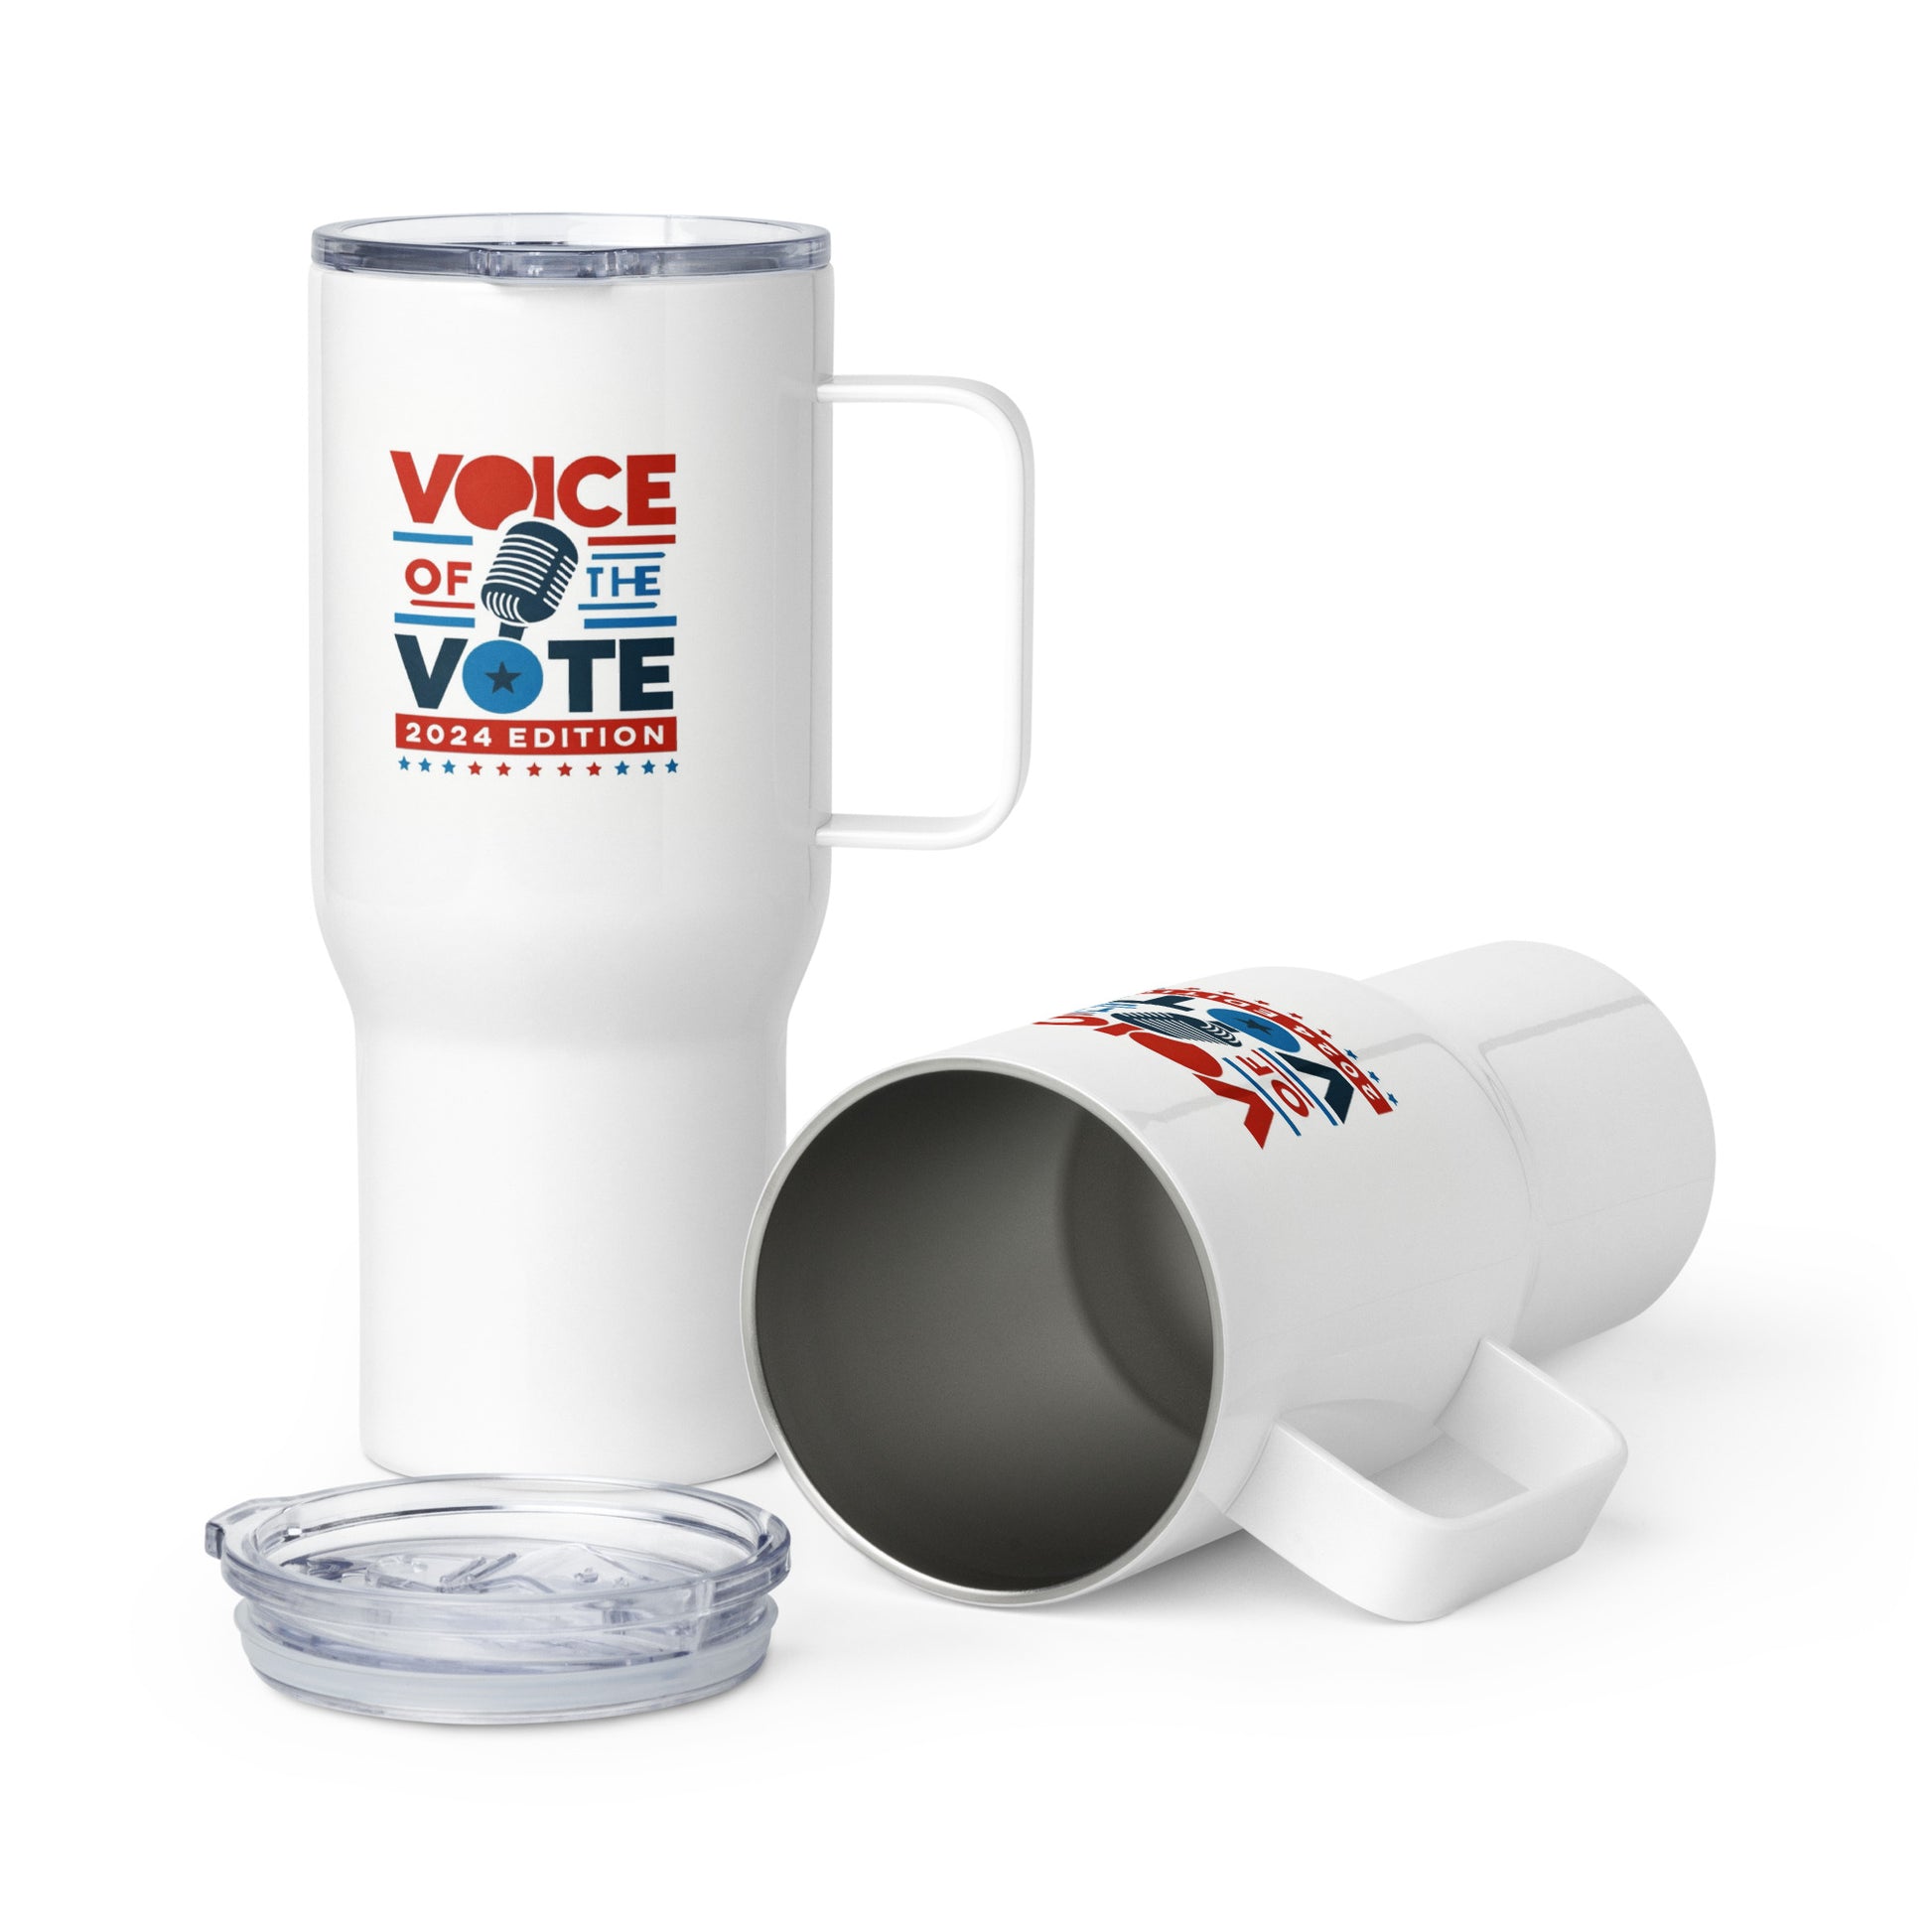 Voice of the Vote 2024 Edition Tumbler – Patriotic Design with American Flags and Fireworks”